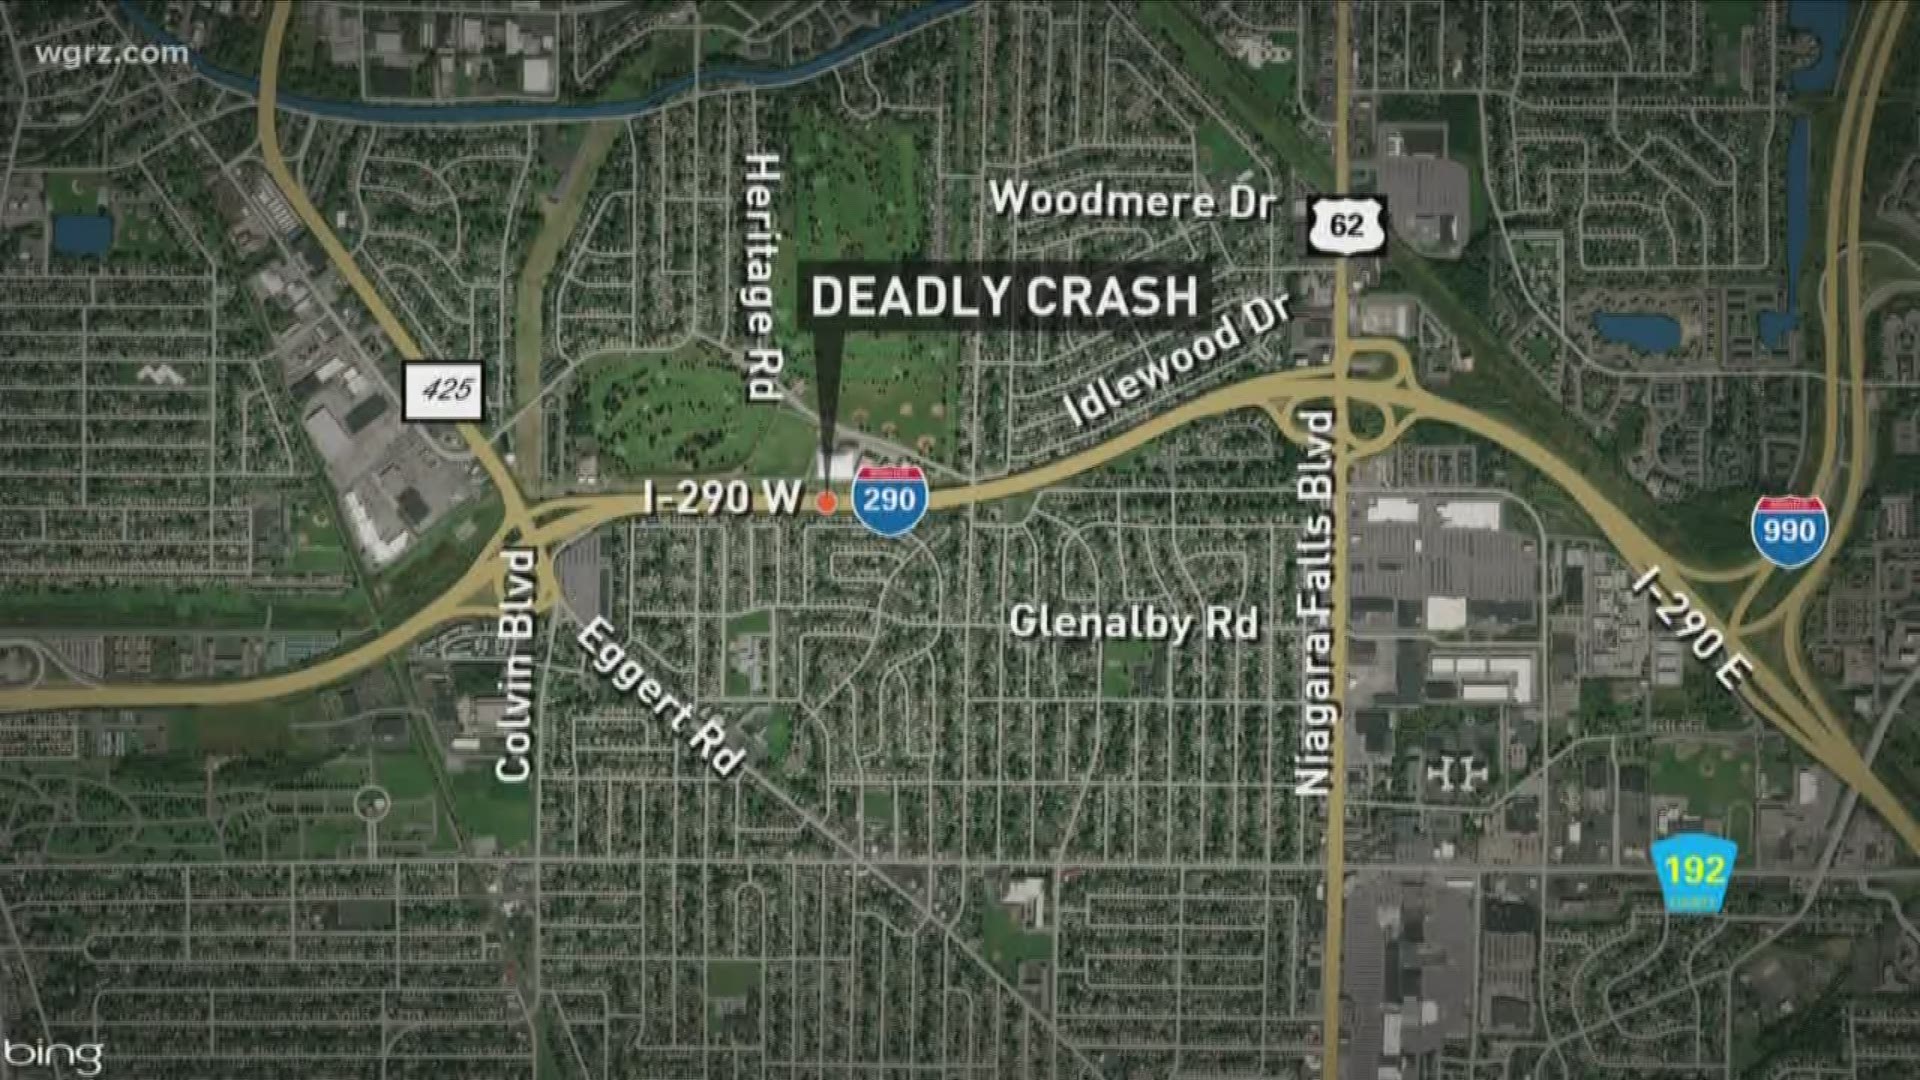 Town of Tonawanda Police investigate fatal accident on I-290